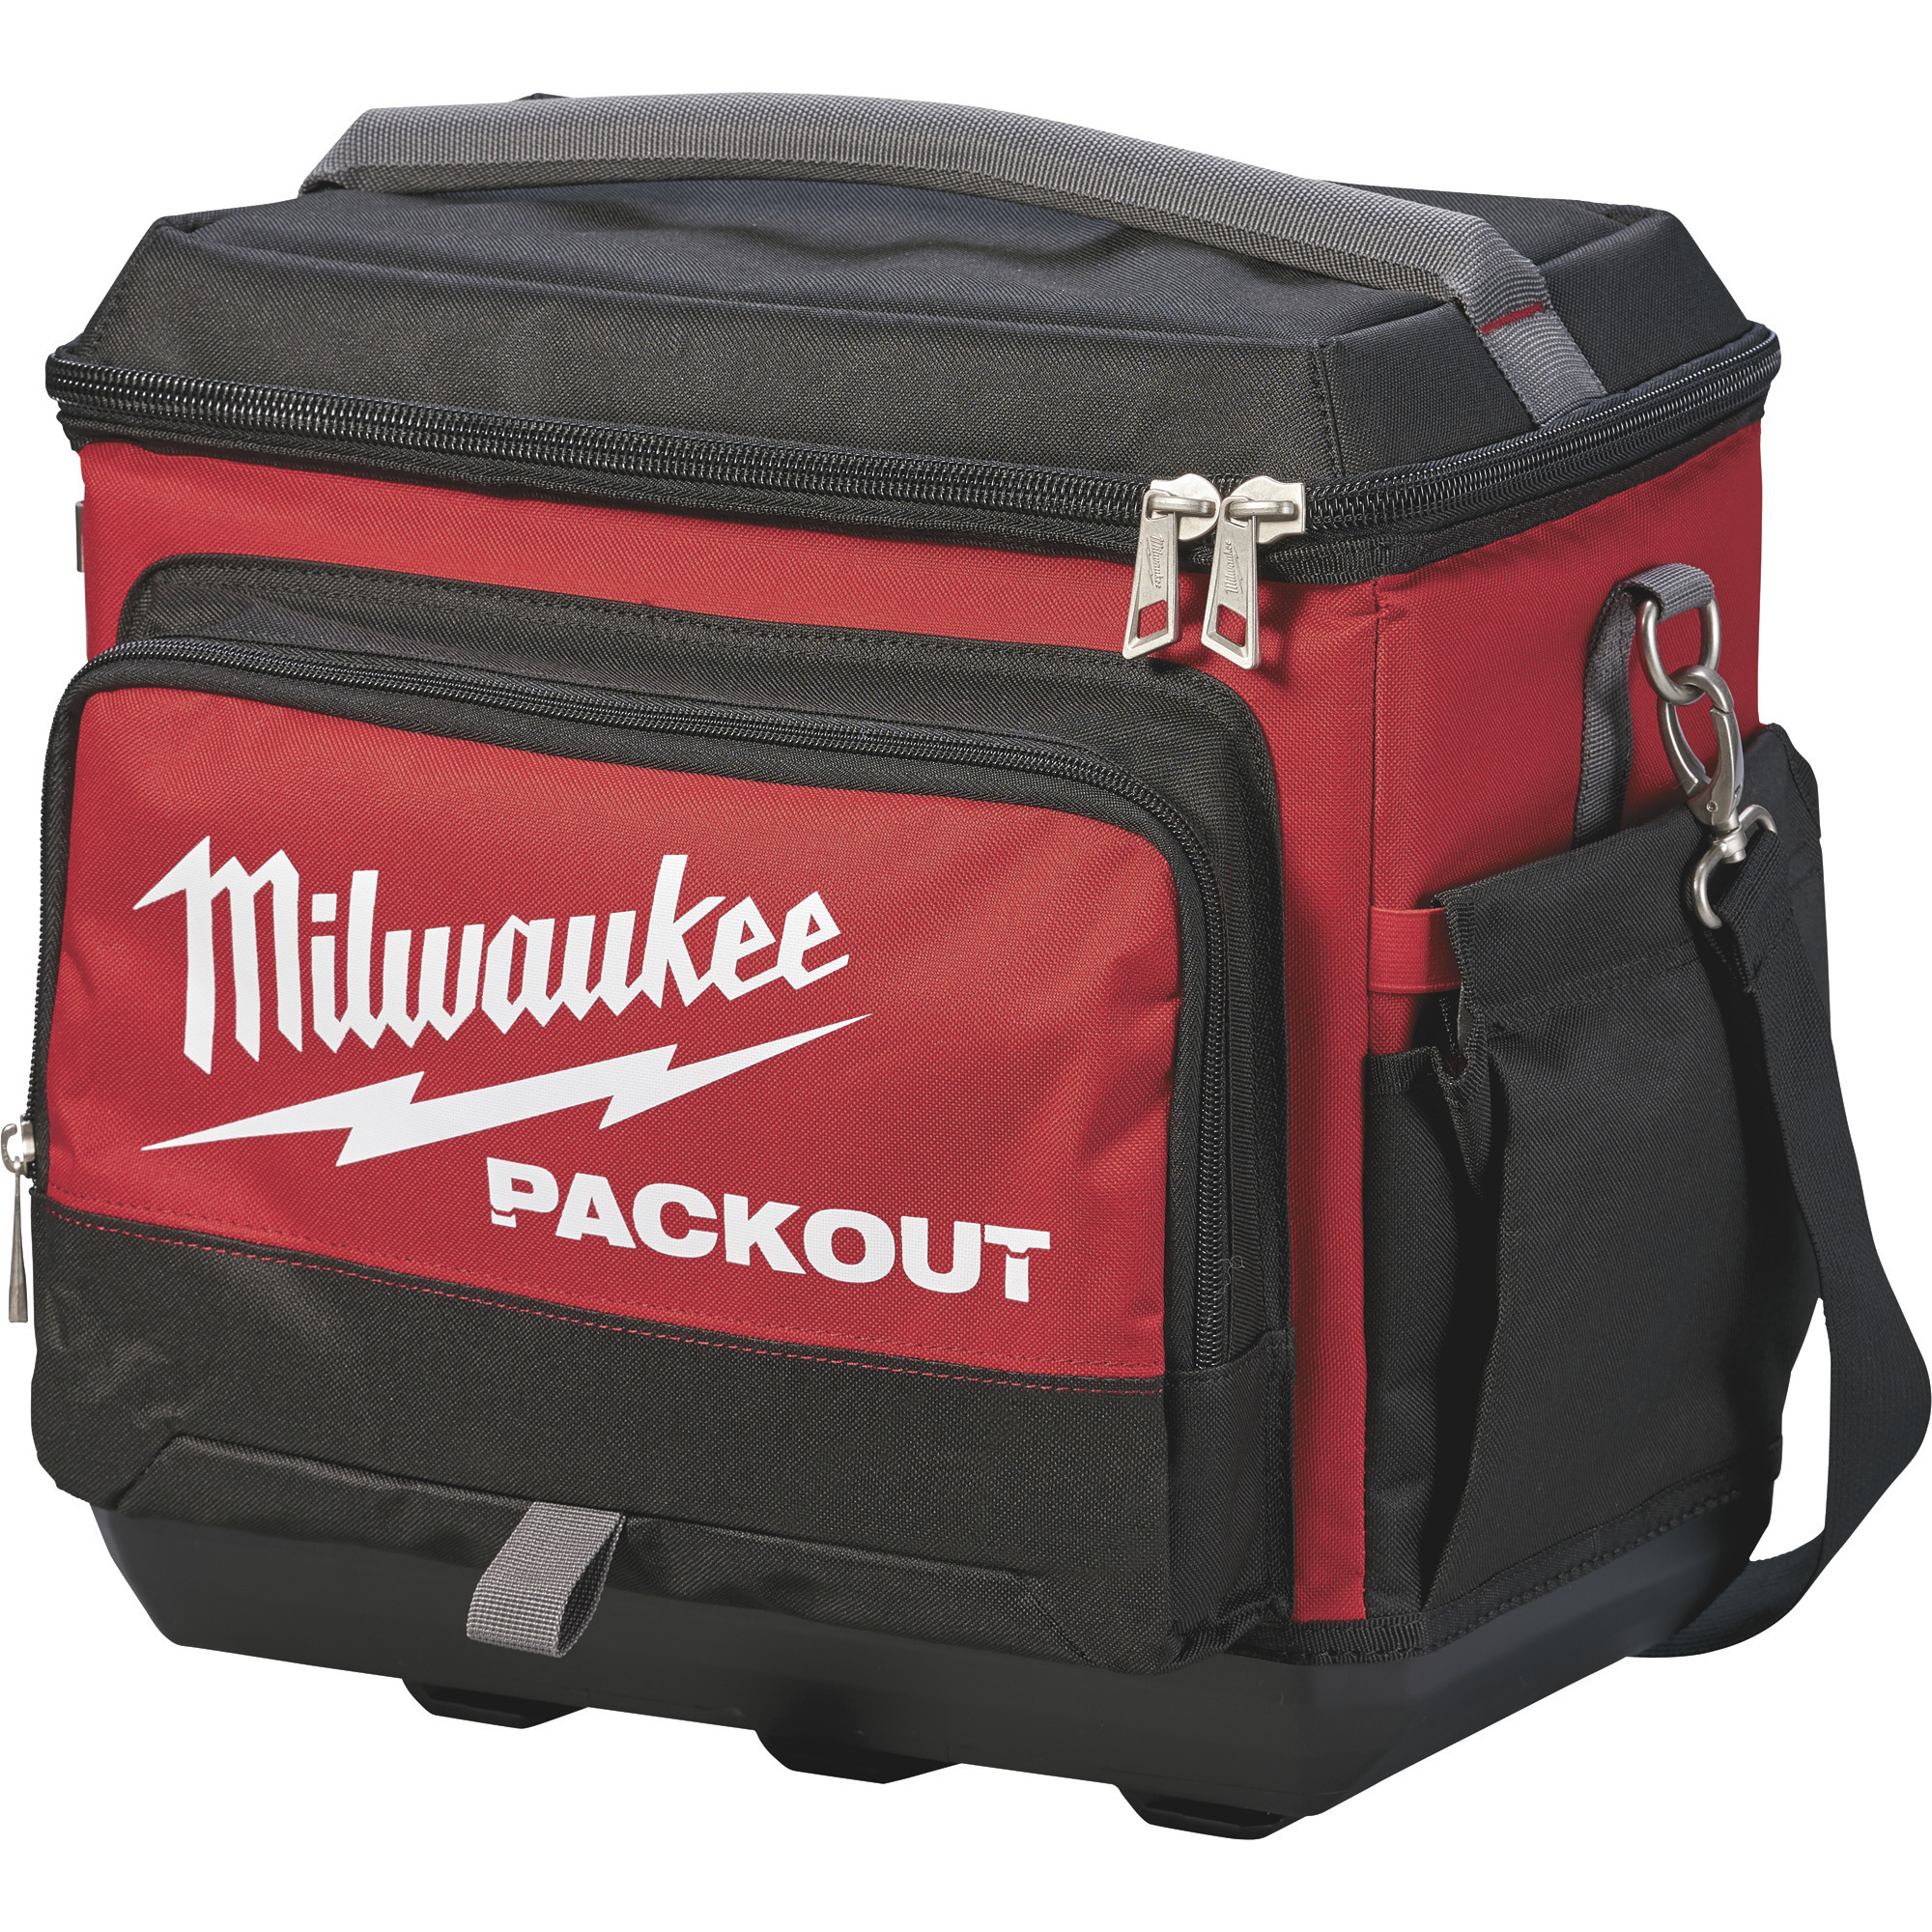 Milwaukee Packout Cooler, 15 3/4Inch L x 15 3/4Inch W x 11 13/16Inch H, Model 48-22-8302